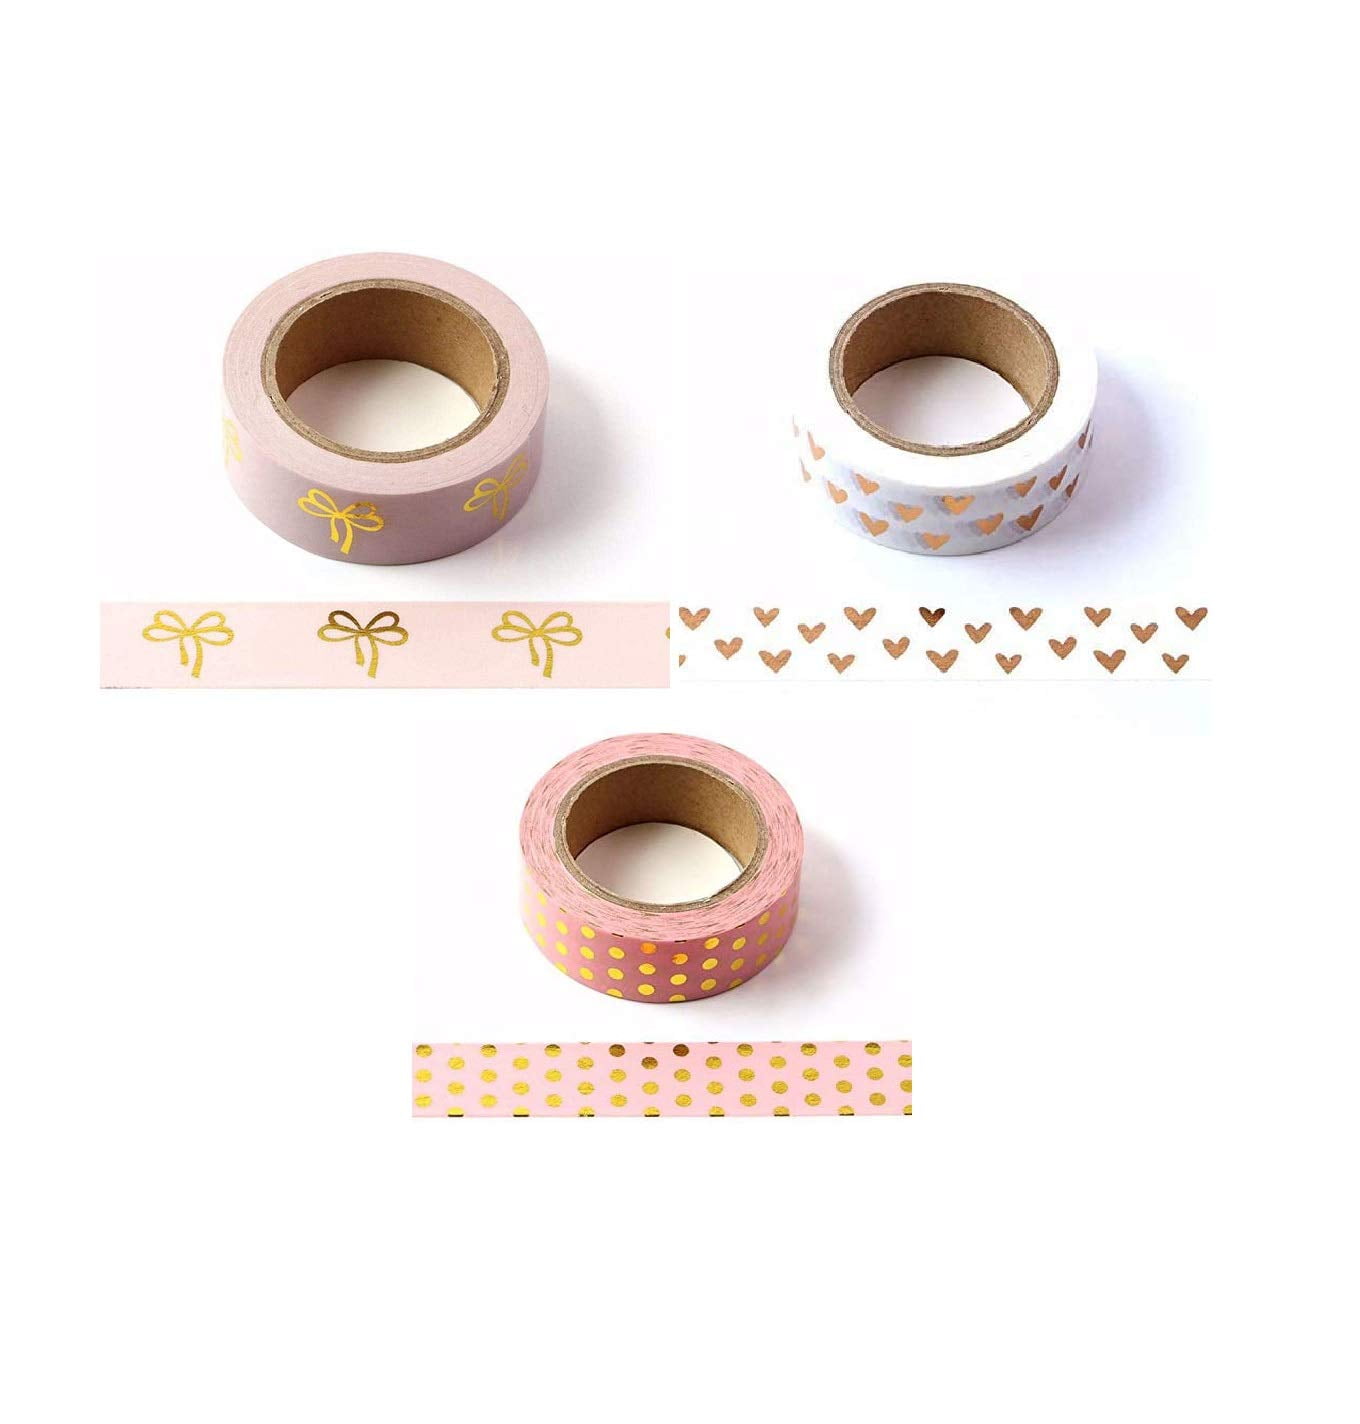 WASHI TAPE 15/15mm set of 2 - HEART & BOW PINK/WHITE set + silver